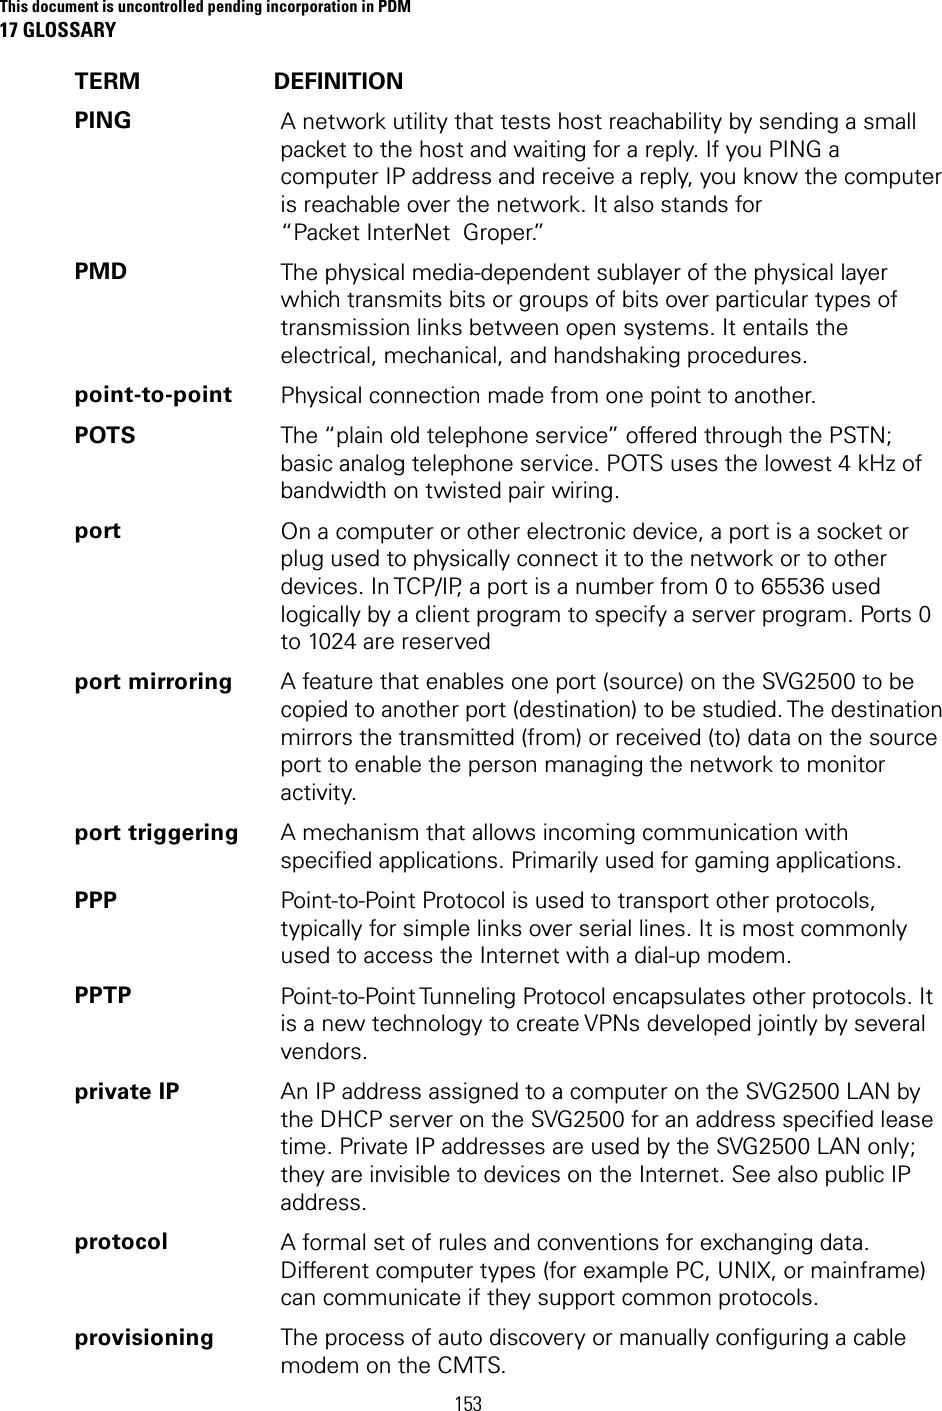 This document is uncontrolled pending incorporation in PDM 17 GLOSSARY  153 TERM DEFINITION PING  A network utility that tests host reachability by sending a small packet to the host and waiting for a reply. If you PING a computer IP address and receive a reply, you know the computer is reachable over the network. It also stands for “Packet InterNet  Groper.” PMD  The physical media-dependent sublayer of the physical layer which transmits bits or groups of bits over particular types of transmission links between open systems. It entails the electrical, mechanical, and handshaking procedures. point-to-point  Physical connection made from one point to another. POTS  The “plain old telephone service” offered through the PSTN; basic analog telephone service. POTS uses the lowest 4 kHz of bandwidth on twisted pair wiring. port  On a computer or other electronic device, a port is a socket or plug used to physically connect it to the network or to other devices. In TCP/IP, a port is a number from 0 to 65536 used logically by a client program to specify a server program. Ports 0 to 1024 are reserved port mirroring  A feature that enables one port (source) on the SVG2500 to be copied to another port (destination) to be studied. The destination mirrors the transmitted (from) or received (to) data on the source port to enable the person managing the network to monitor activity. port triggering  A mechanism that allows incoming communication with specified applications. Primarily used for gaming applications. PPP  Point-to-Point Protocol is used to transport other protocols, typically for simple links over serial lines. It is most commonly used to access the Internet with a dial-up modem. PPTP  Point-to-Point Tunneling Protocol encapsulates other protocols. It is a new technology to create VPNs developed jointly by several vendors. private IP  An IP address assigned to a computer on the SVG2500 LAN by the DHCP server on the SVG2500 for an address specified lease time. Private IP addresses are used by the SVG2500 LAN only; they are invisible to devices on the Internet. See also public IP address. protocol  A formal set of rules and conventions for exchanging data. Different computer types (for example PC, UNIX, or mainframe) can communicate if they support common protocols. provisioning  The process of auto discovery or manually configuring a cable modem on the CMTS. 